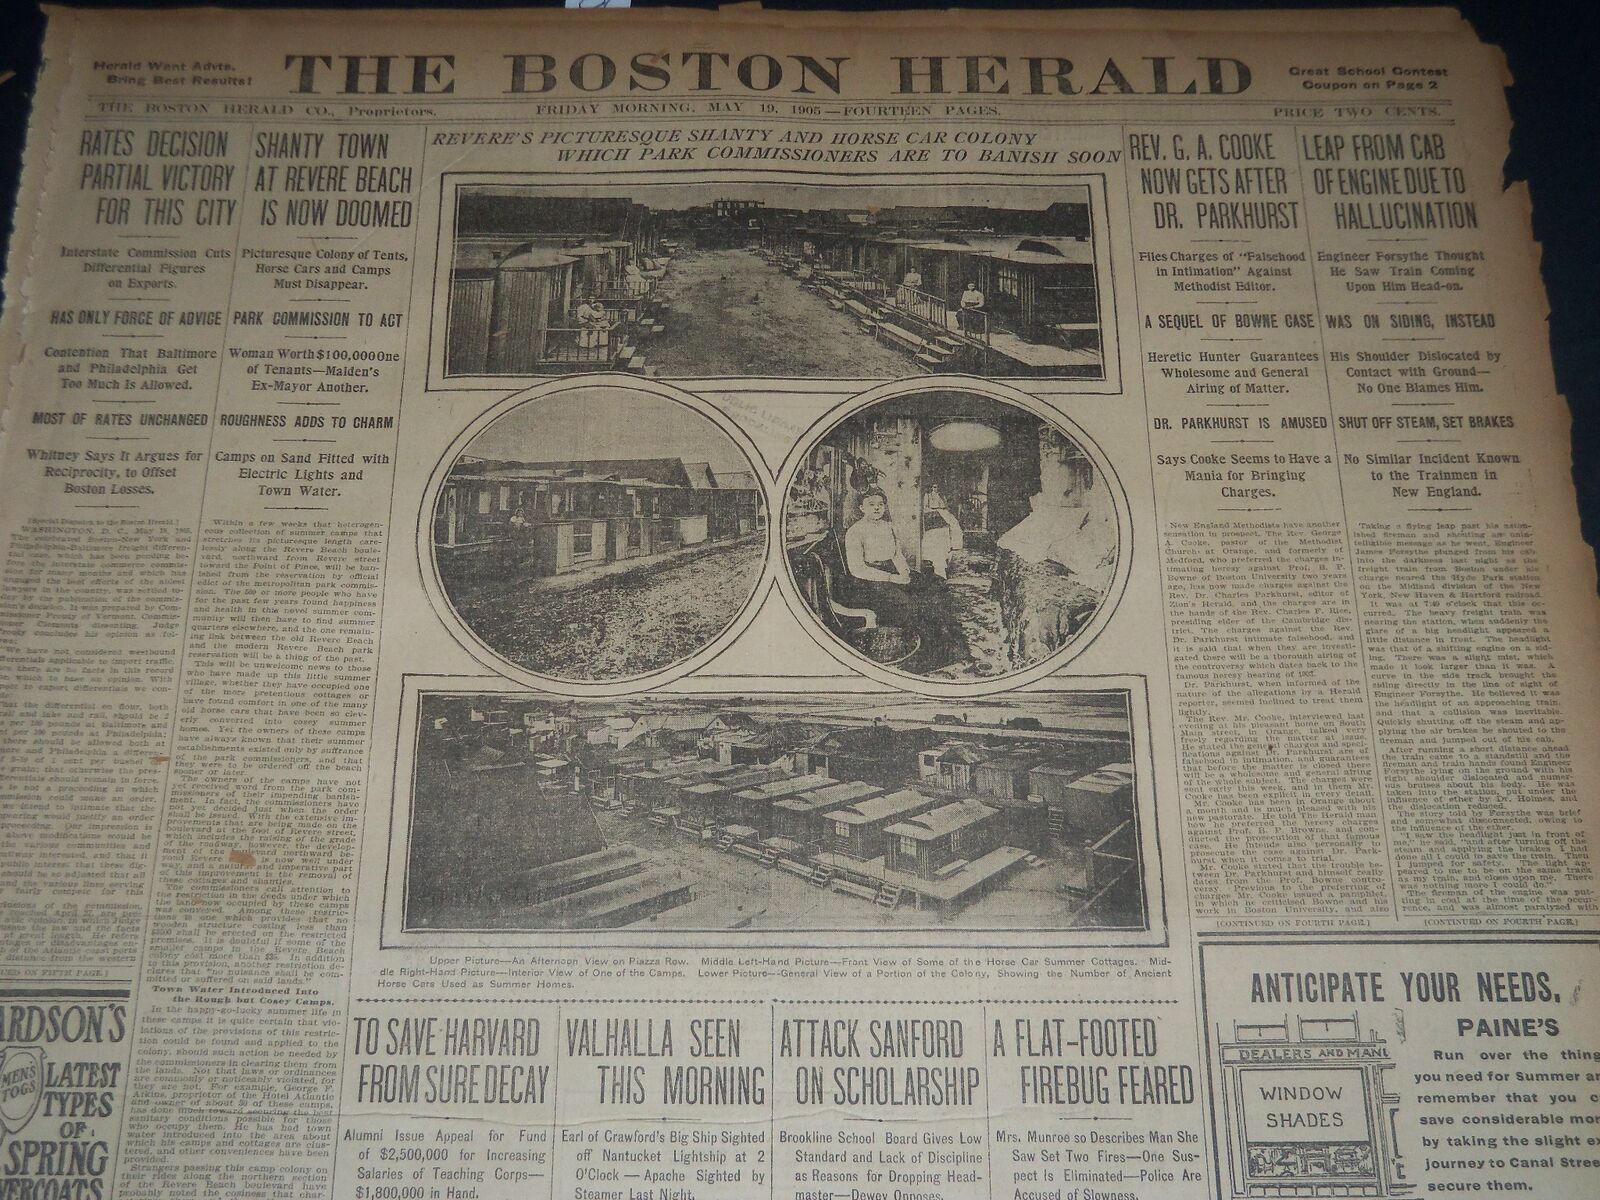 1905 MAY 19 THE BOSTON HERALD - PICTURESQUE REVERE HOUSE CAR COLONY - BH 155